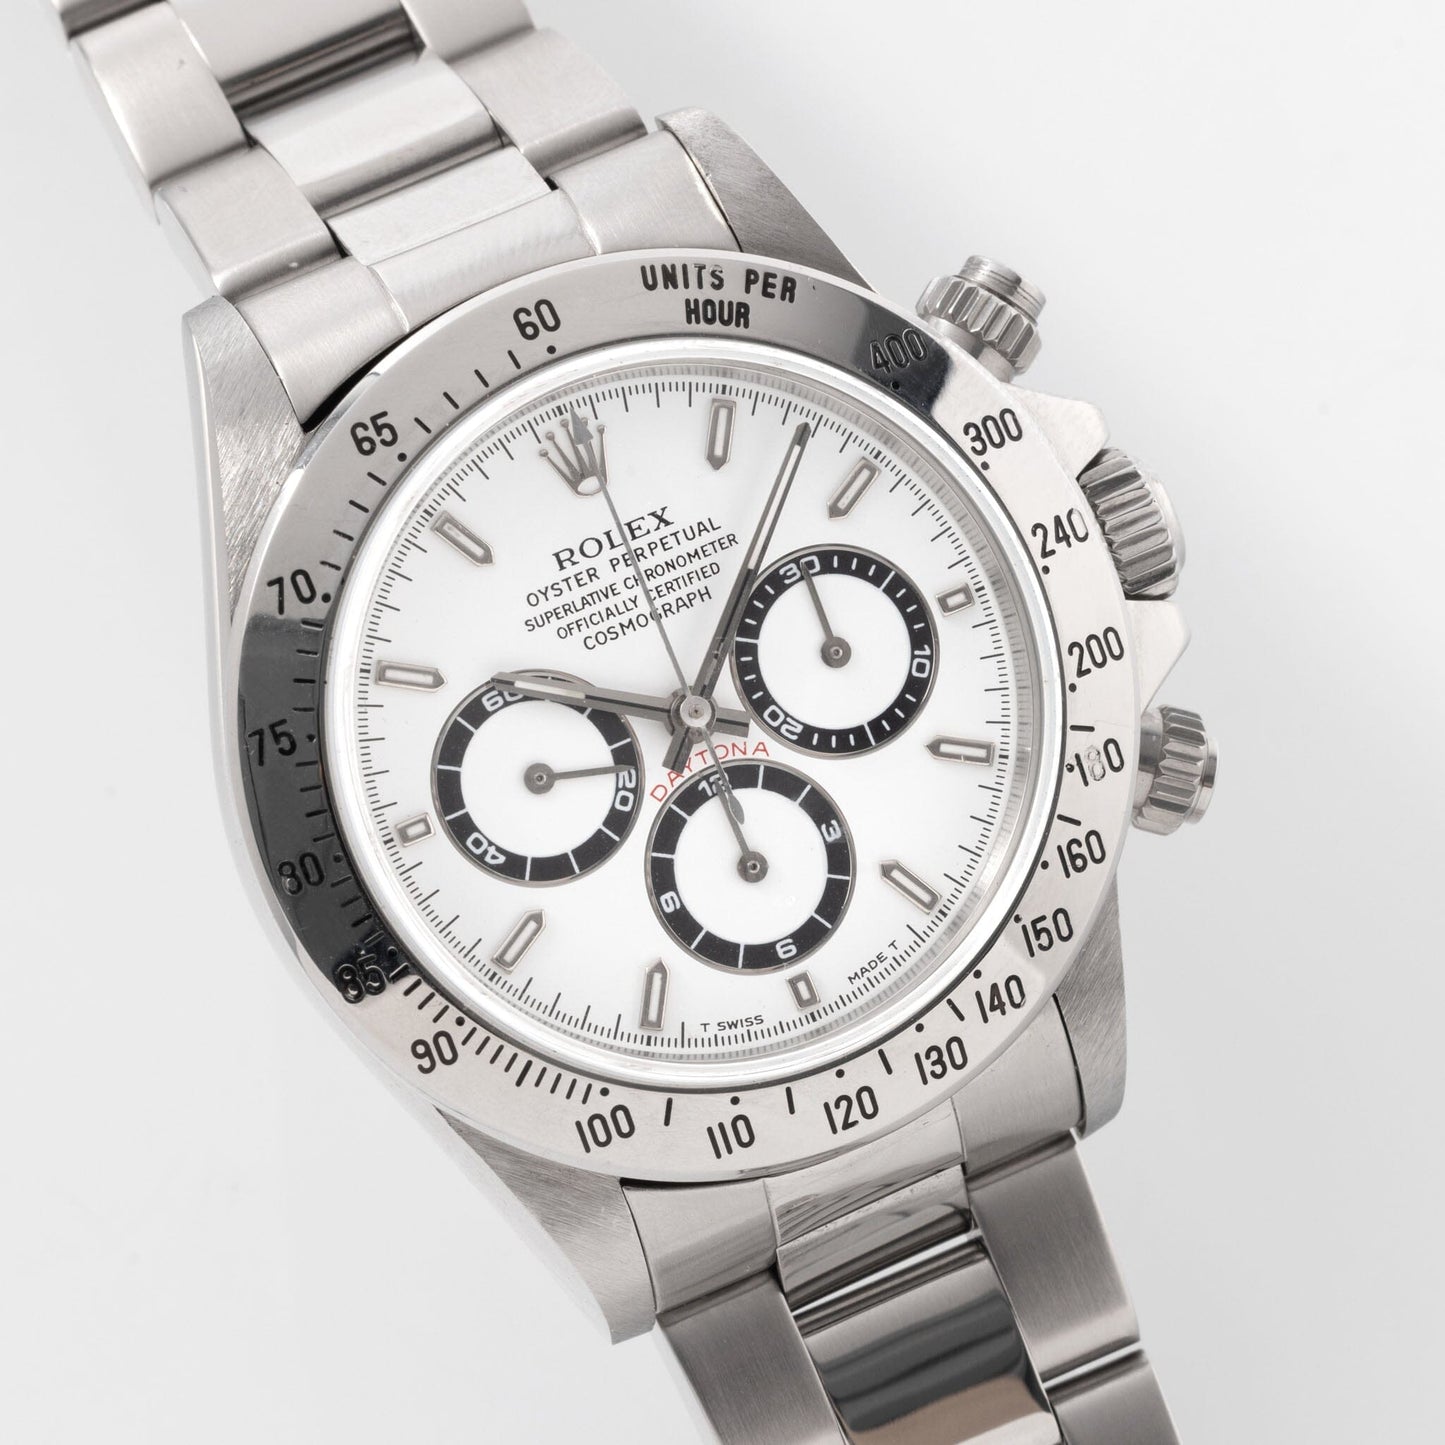 Rolex Daytona 16520 Steel White Mk5 Dial with Papers